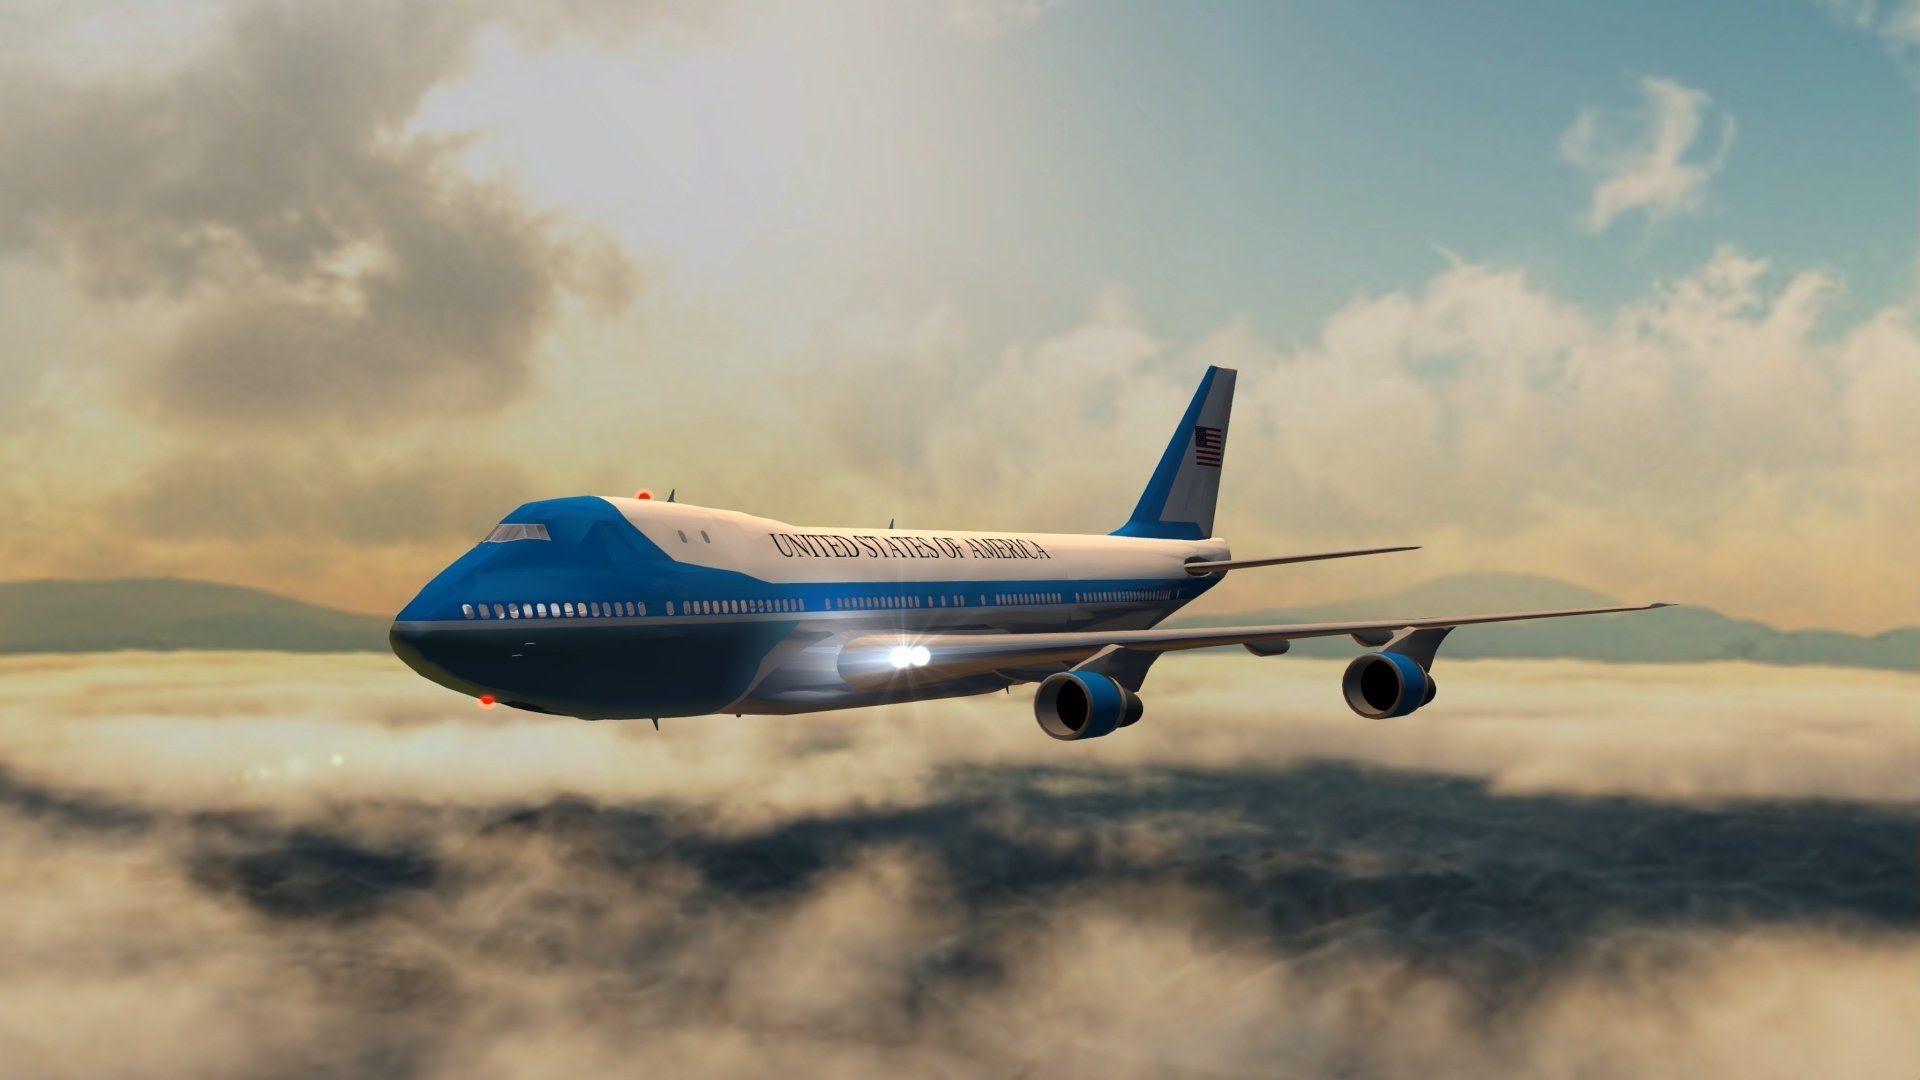 force one wallpaper